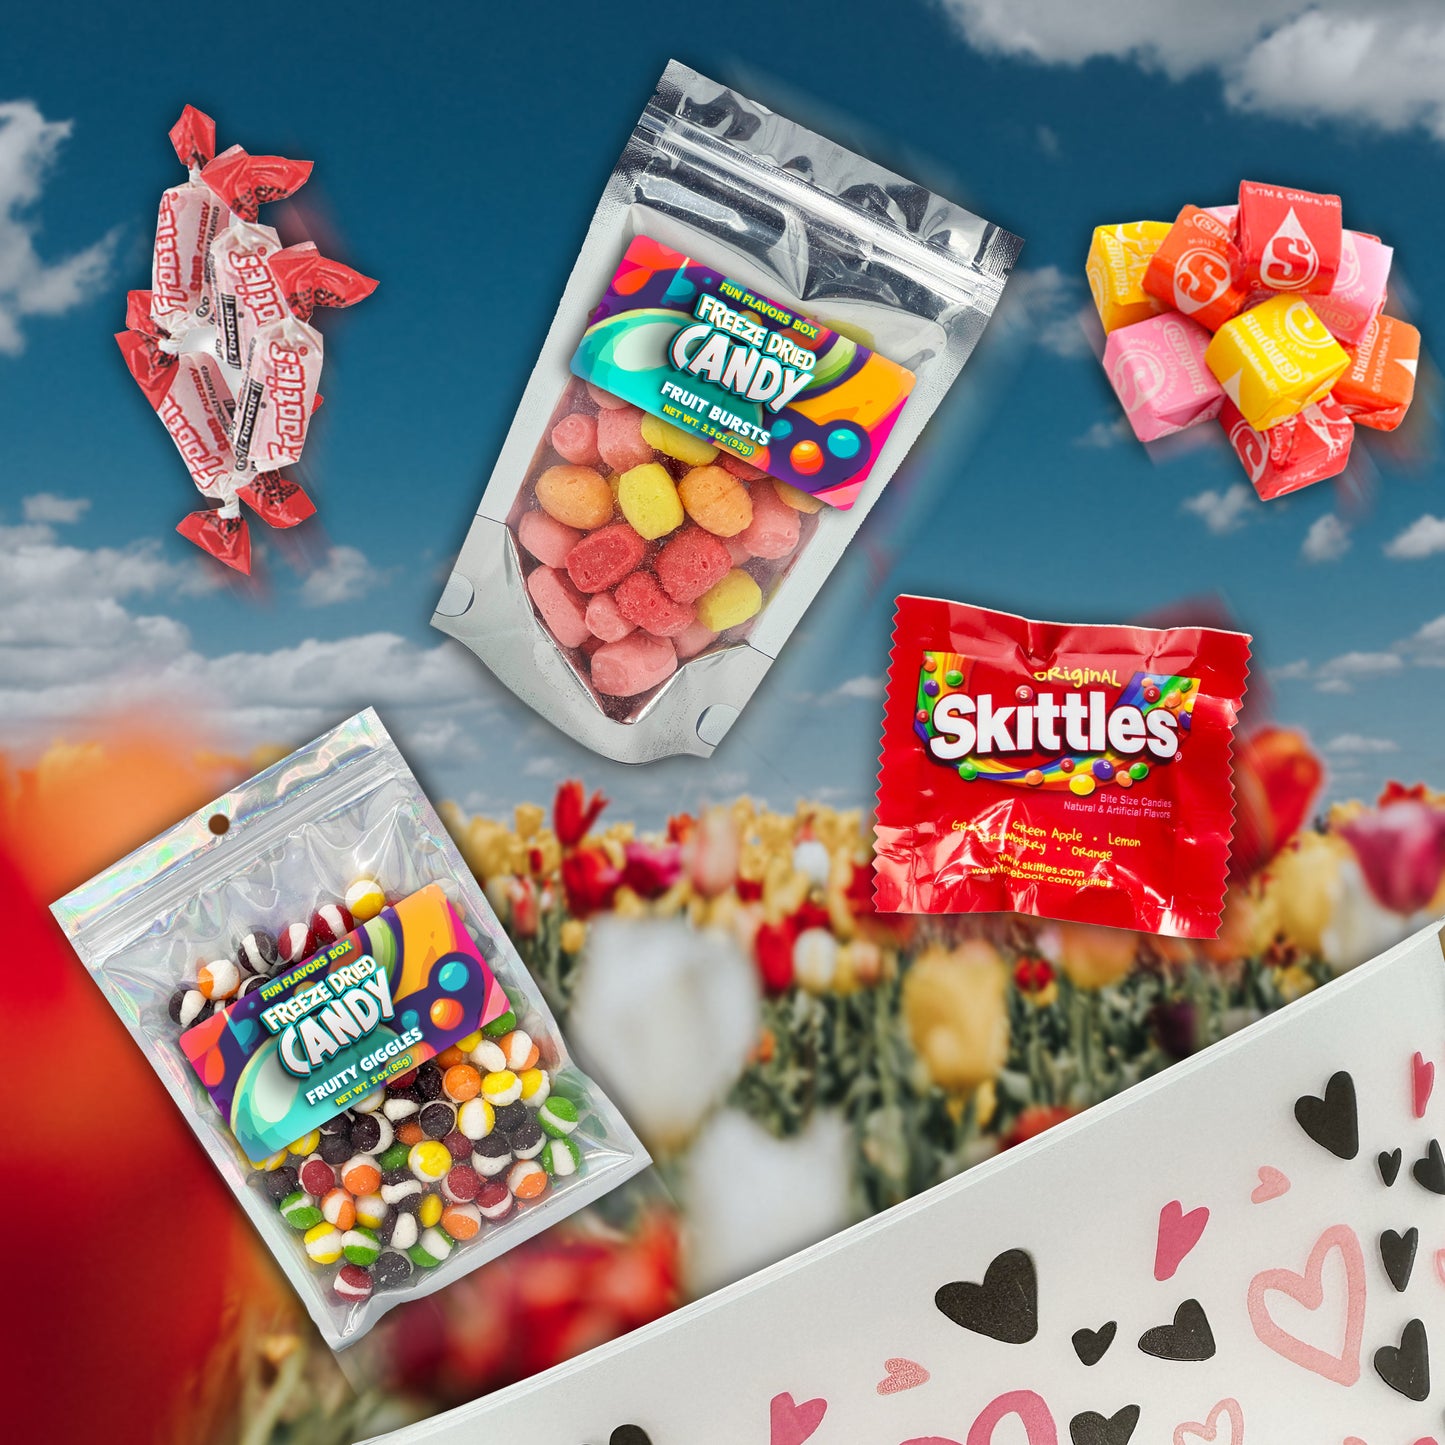 Valentine's Freeze-Dried Candy Gift Basket - 16 Count Variety Pack Care Package